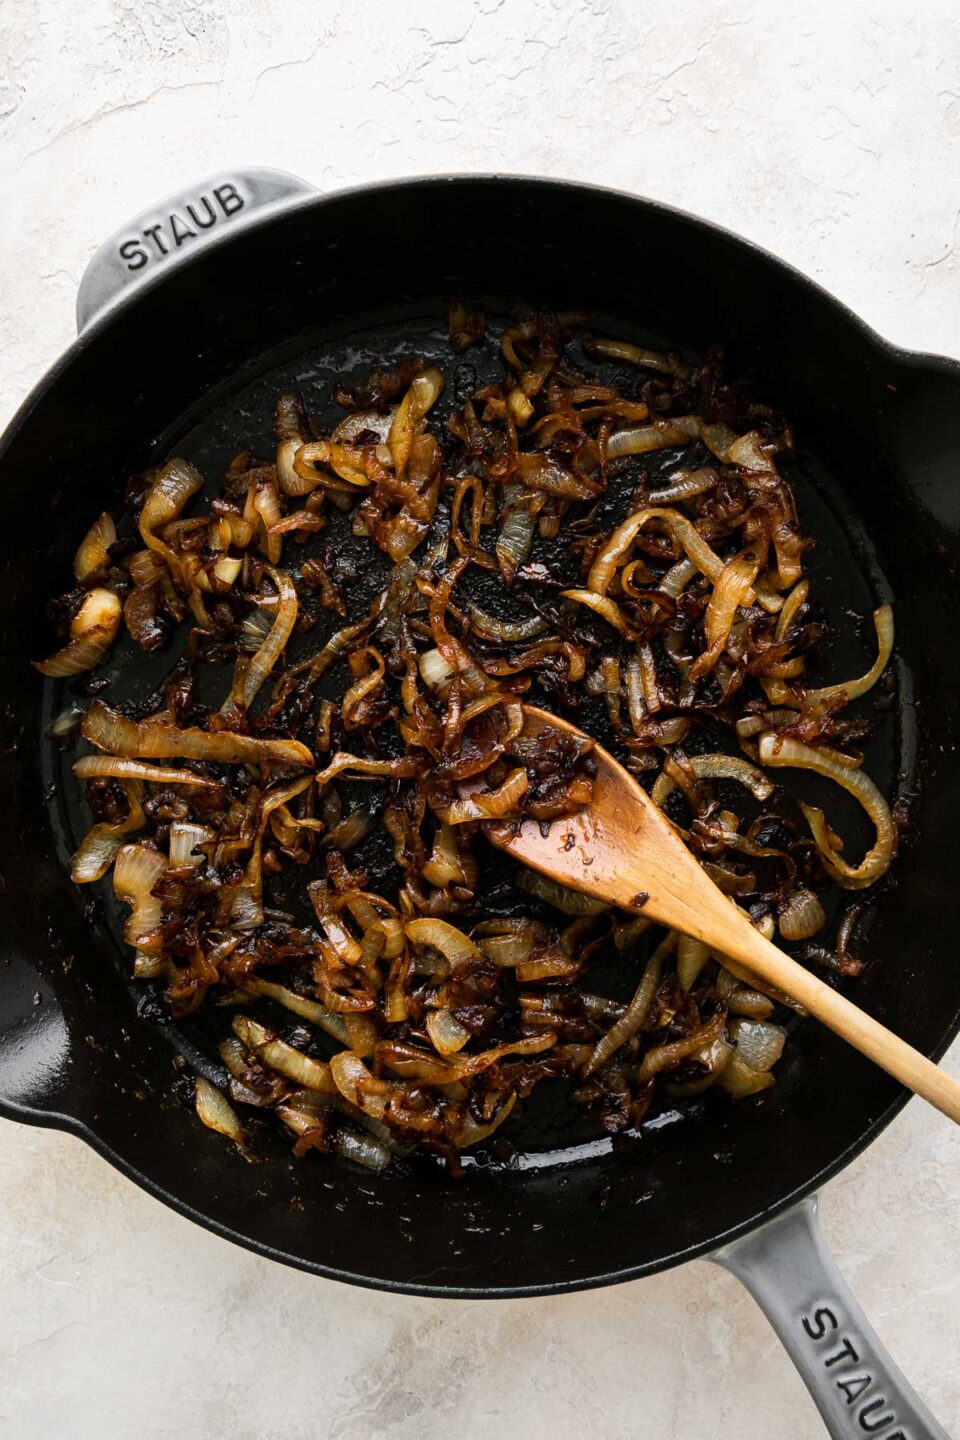 How to make French onion chicken, step 4: Caramelize the onions. Caramelized yellow onions sits inside of a grey Staub cast iron skillet. ​A wooden spoon rests inside of the skillet and the skillet ​sits atop a creamy white textured surface